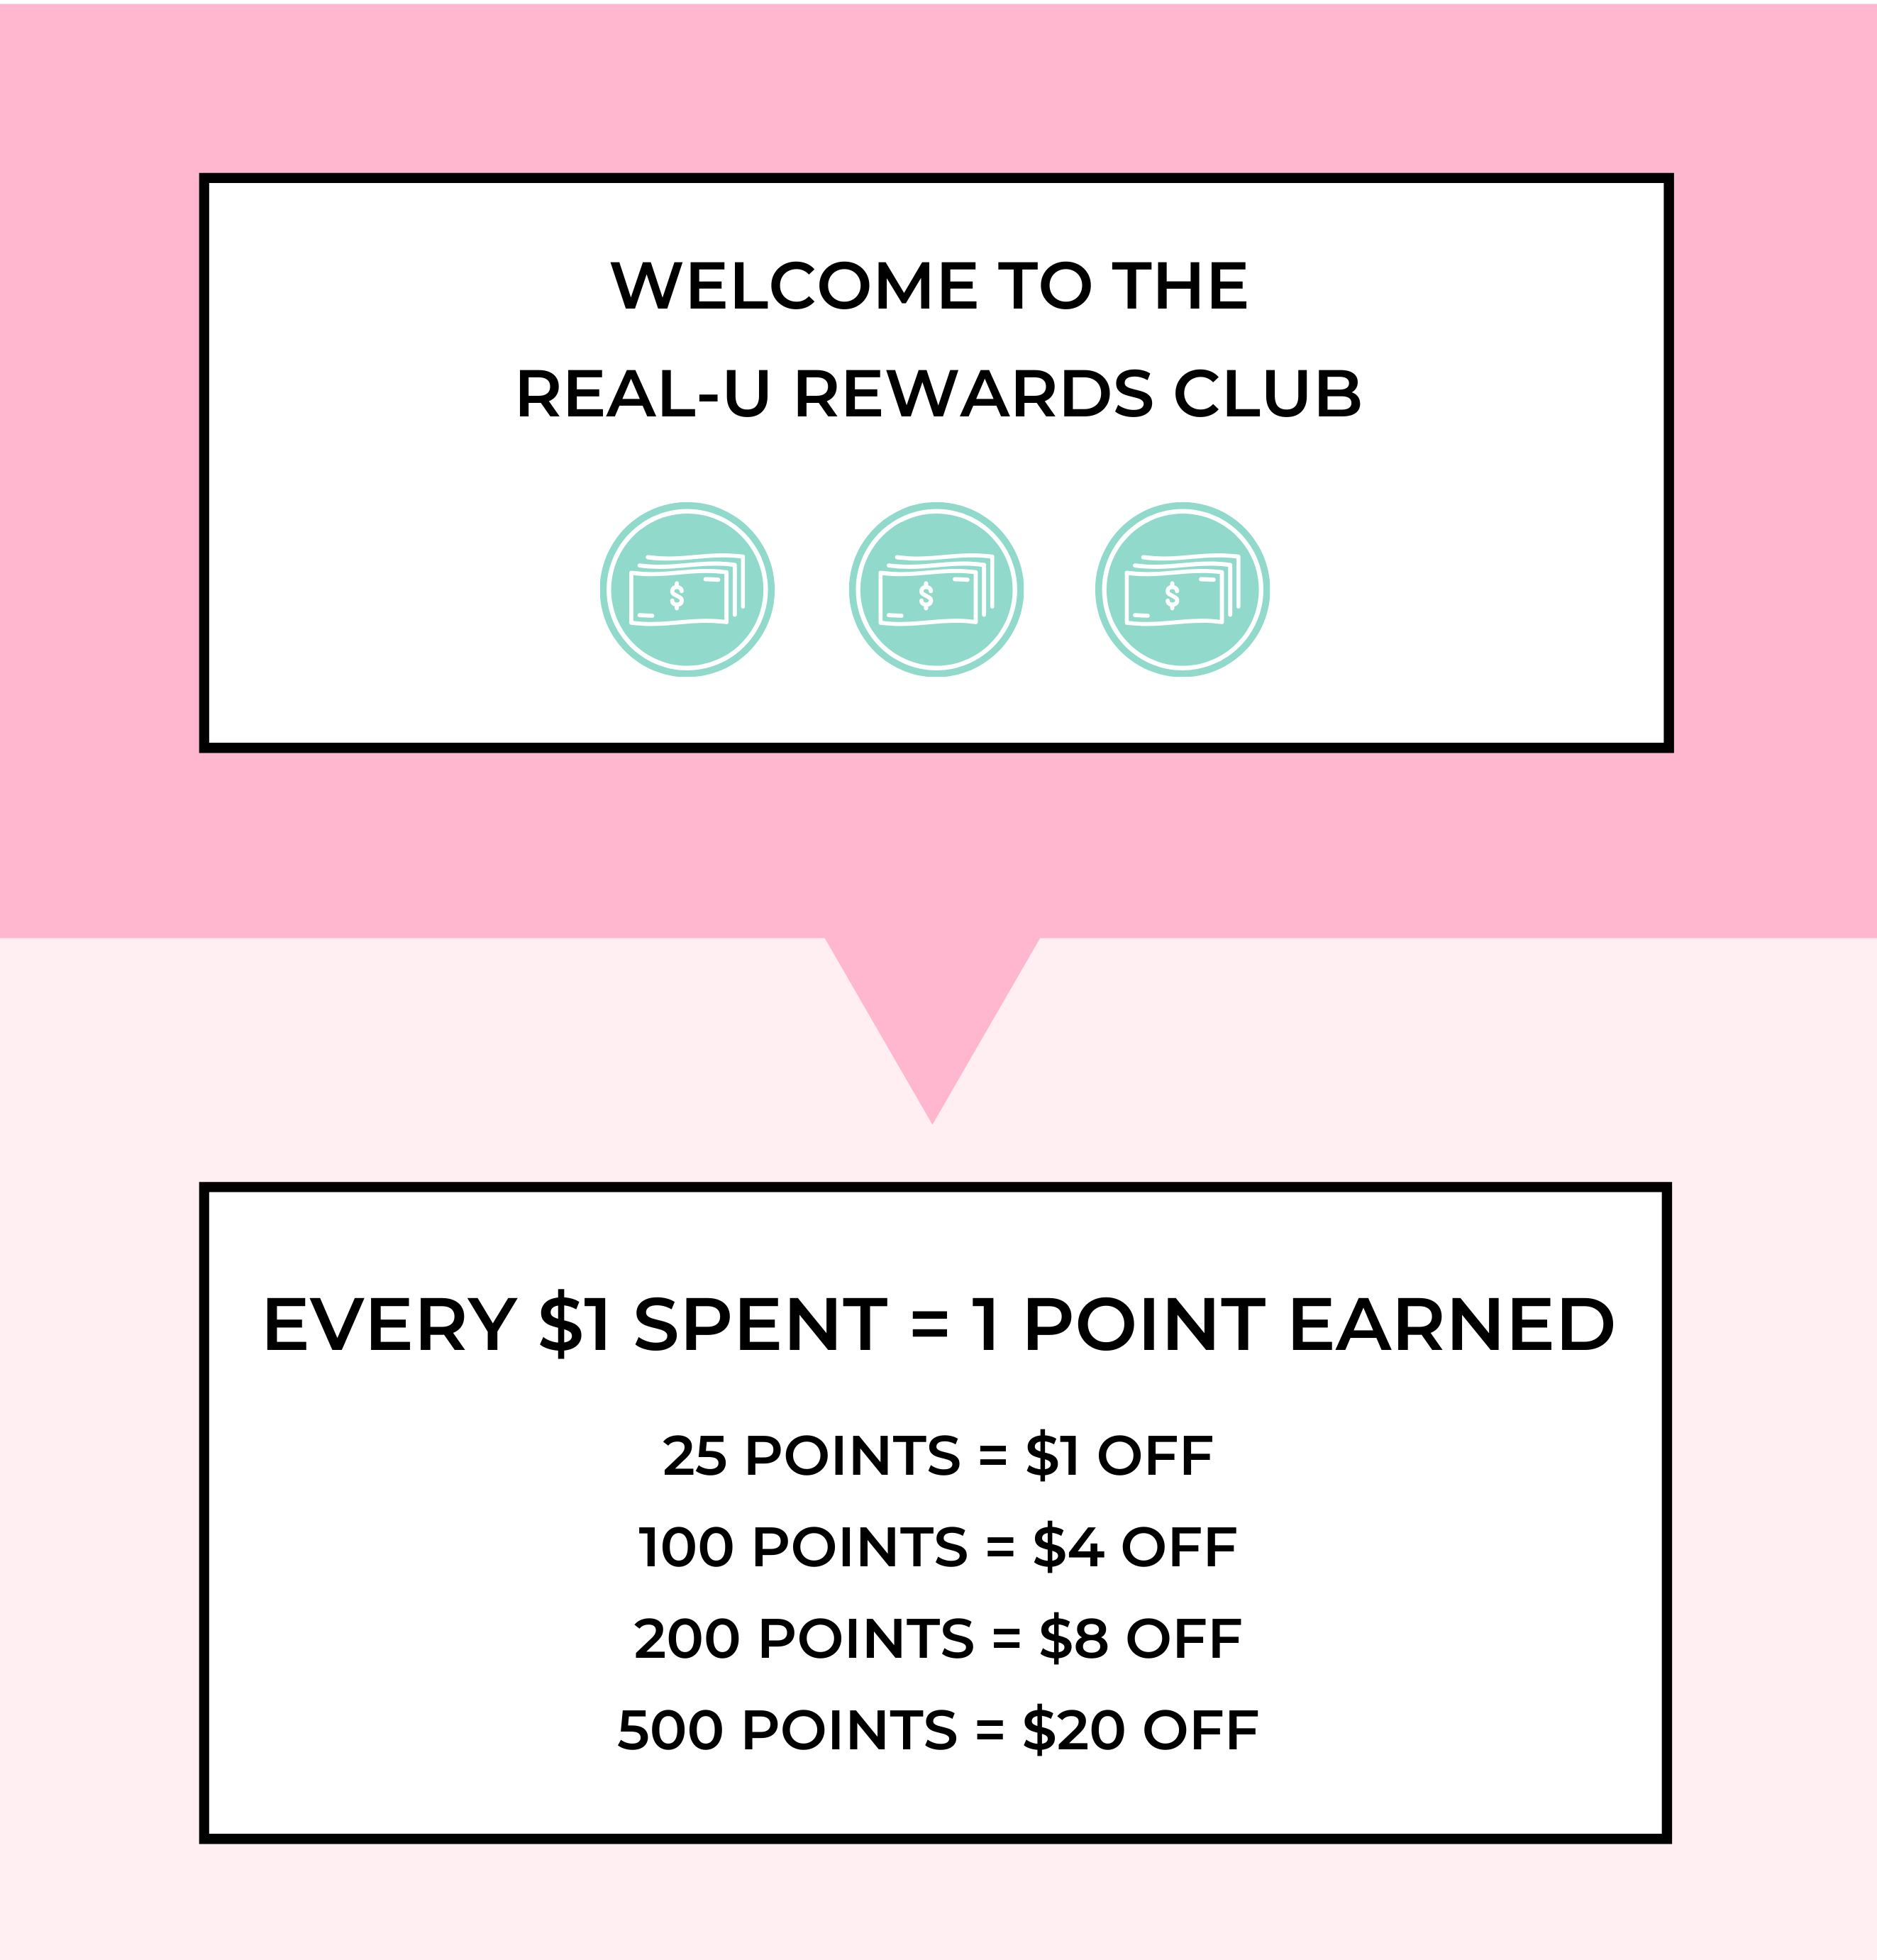 real-u rewards. For every $1 you spend ear 1 point. 25 points = $1 off your next order